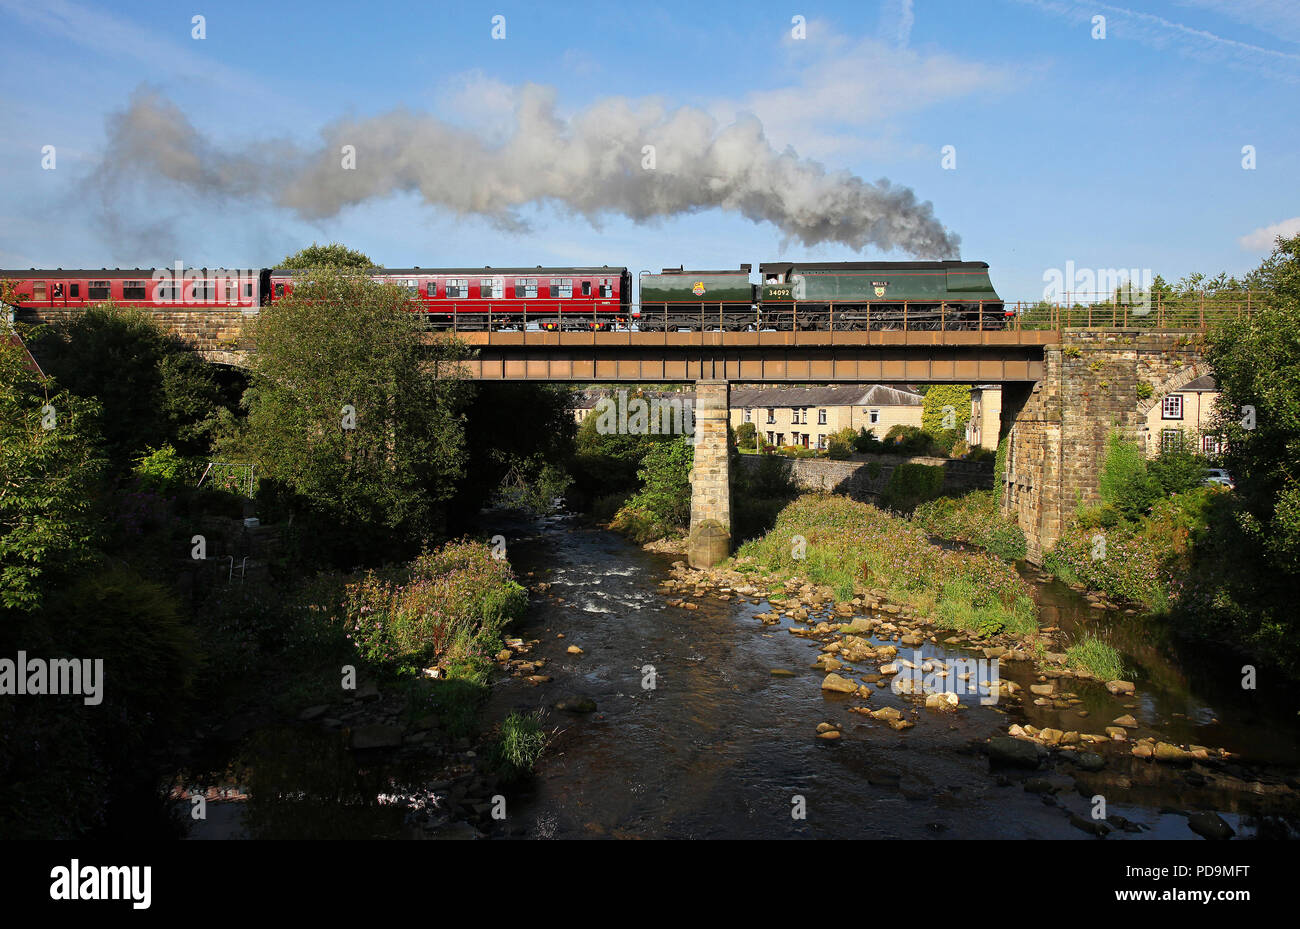 34092 heads away from Summerseat on the East Lancs Railway 10.9.15 Stock Photo